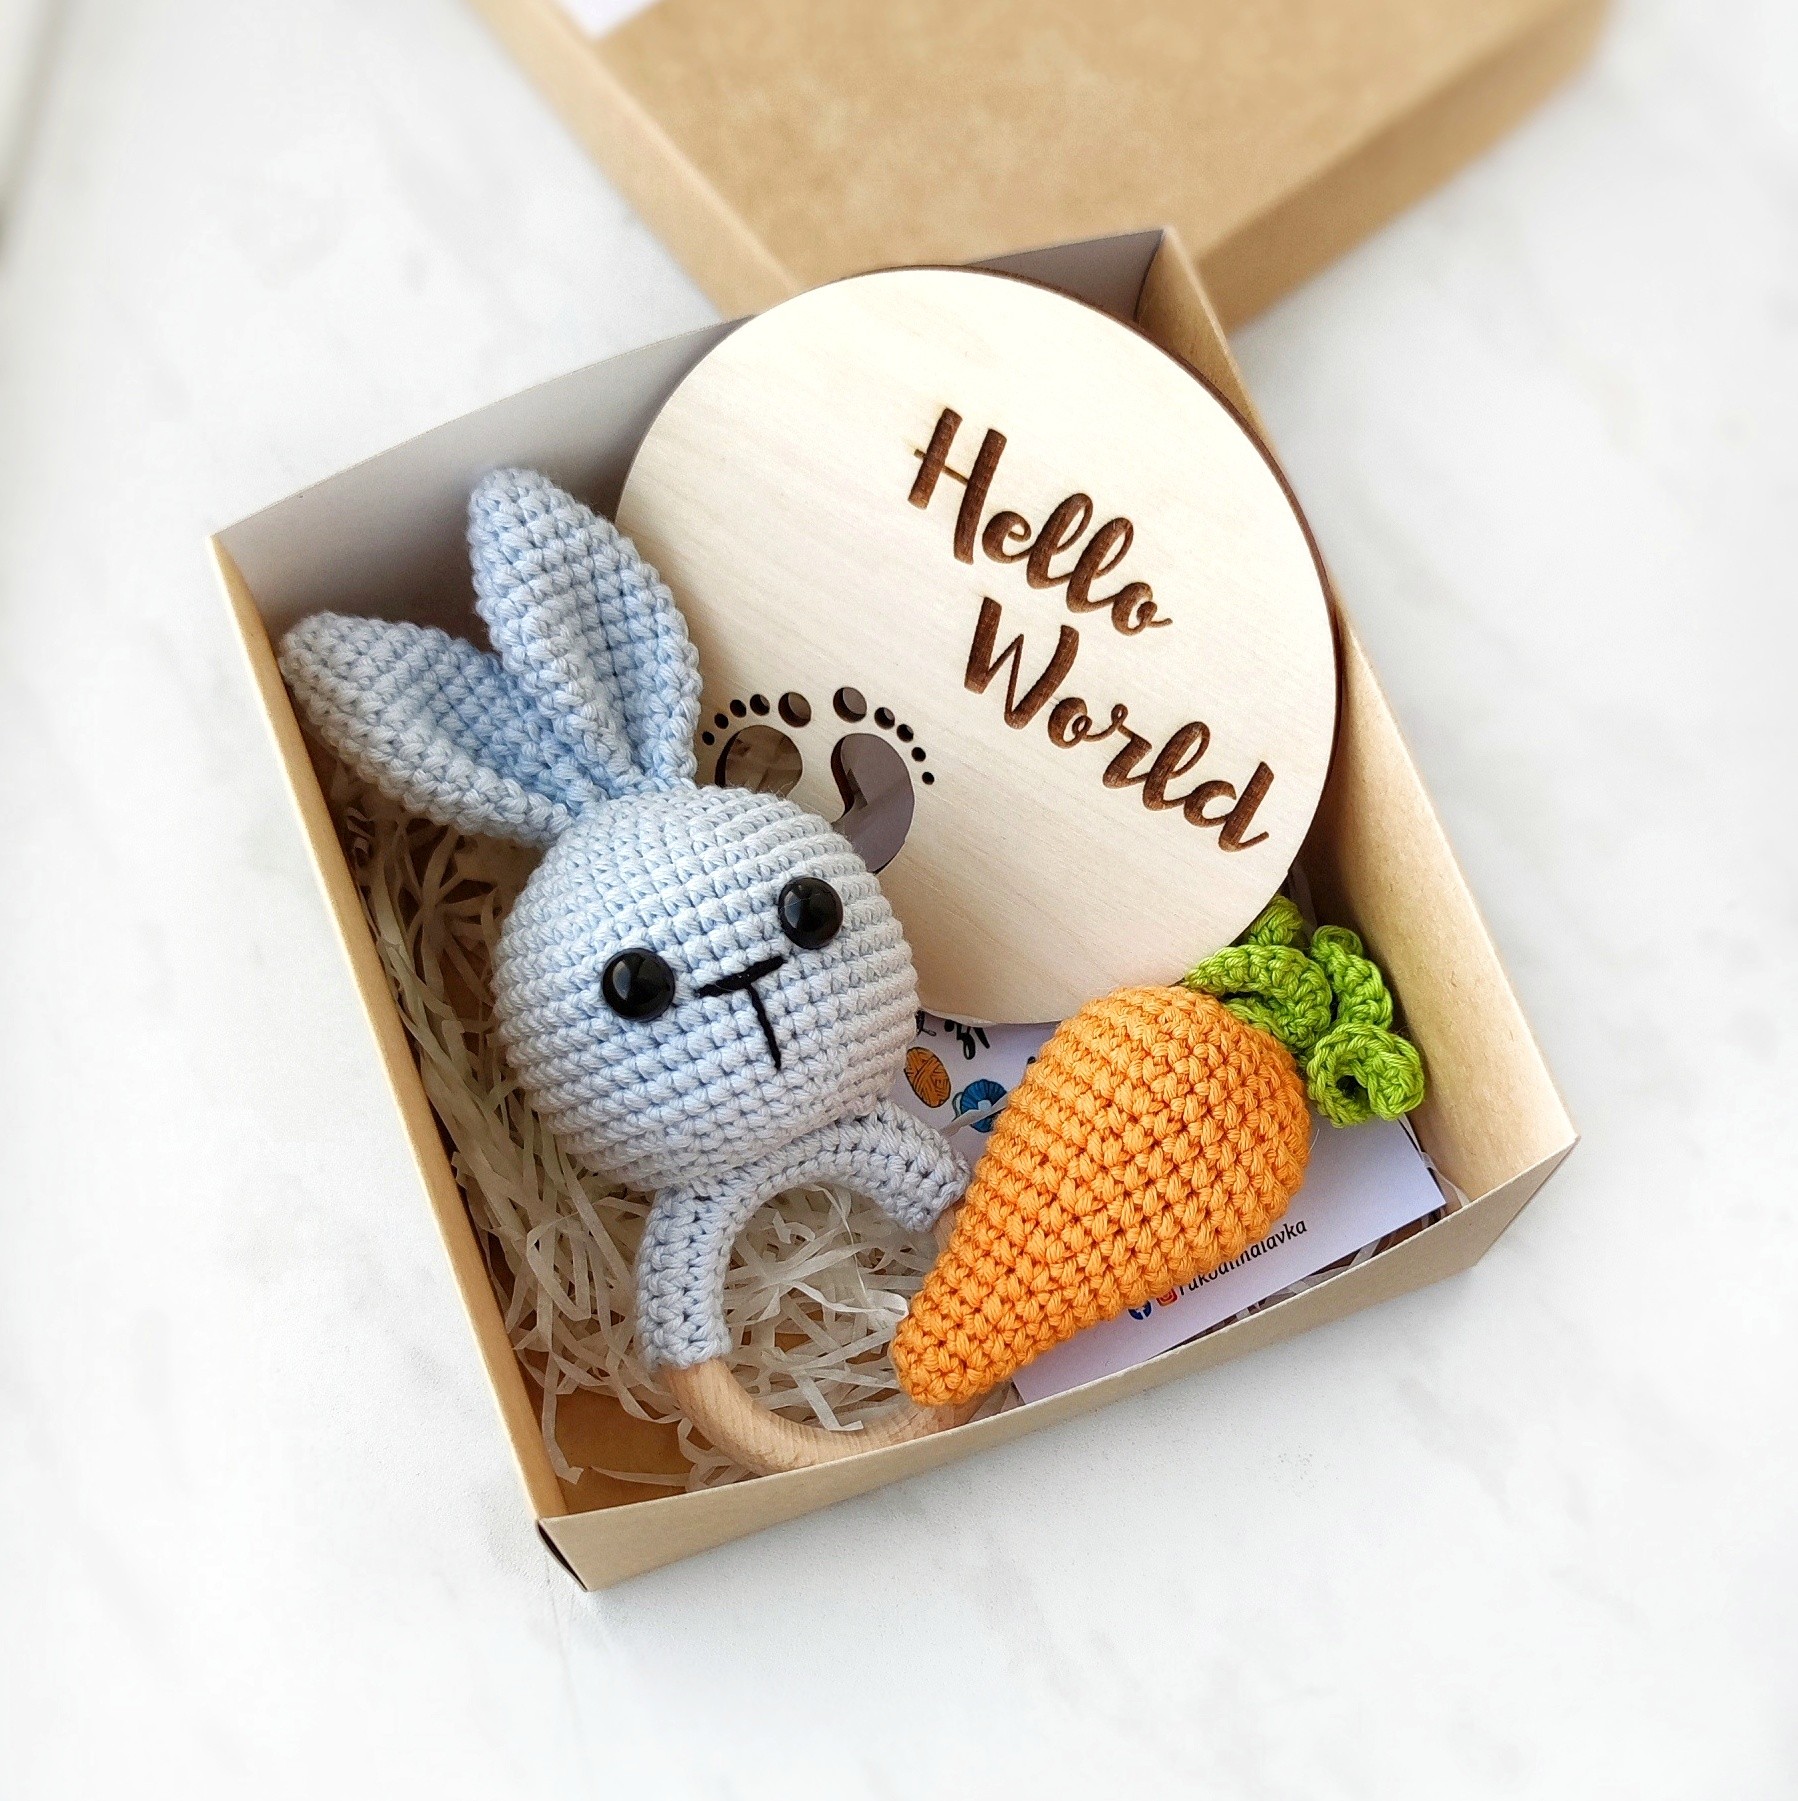 Cute bunny toy set with rattle. Newborn baby gift